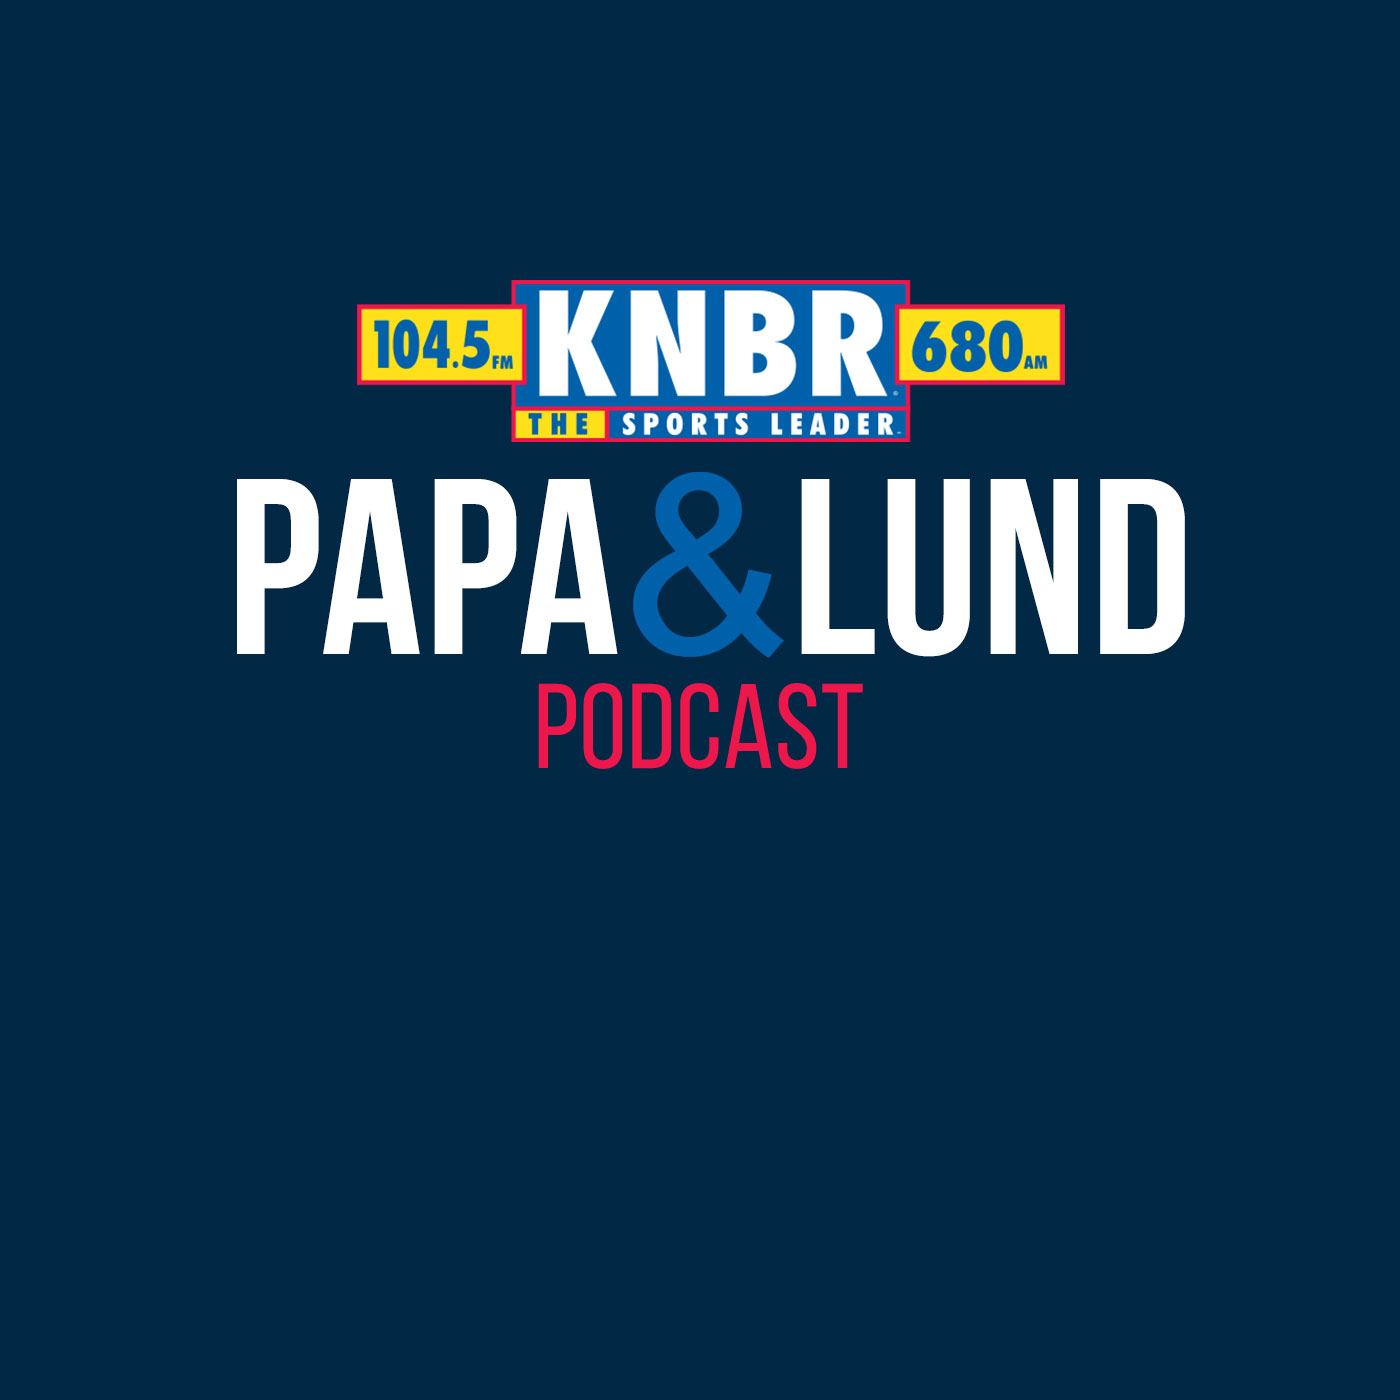 4-17 Sam Amick joins Papa & Lund to discuss the Warriors approach heading into Game 2 against the Kings and what needs to change for them to even the series